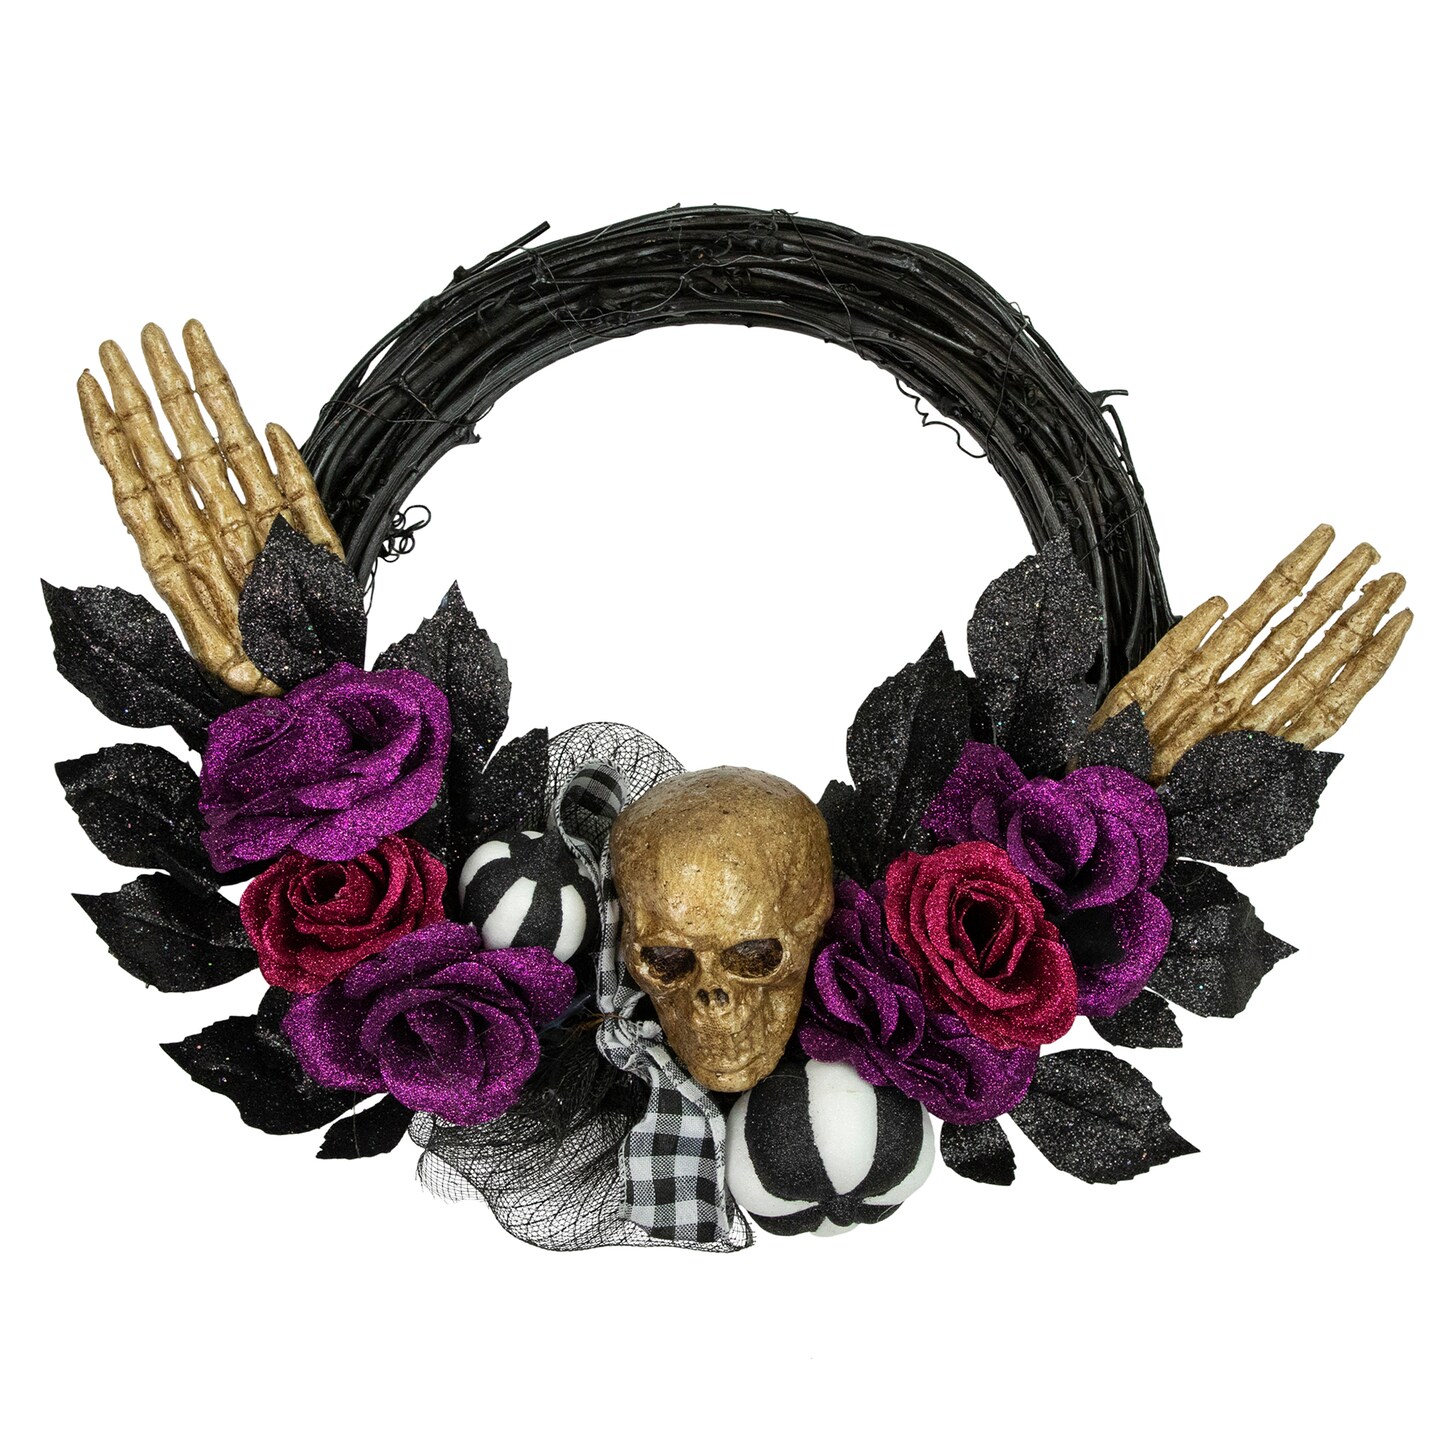 Northlight Skull with Hands and Purple Roses Halloween Twig Wreath, 22-Inch, Unlit